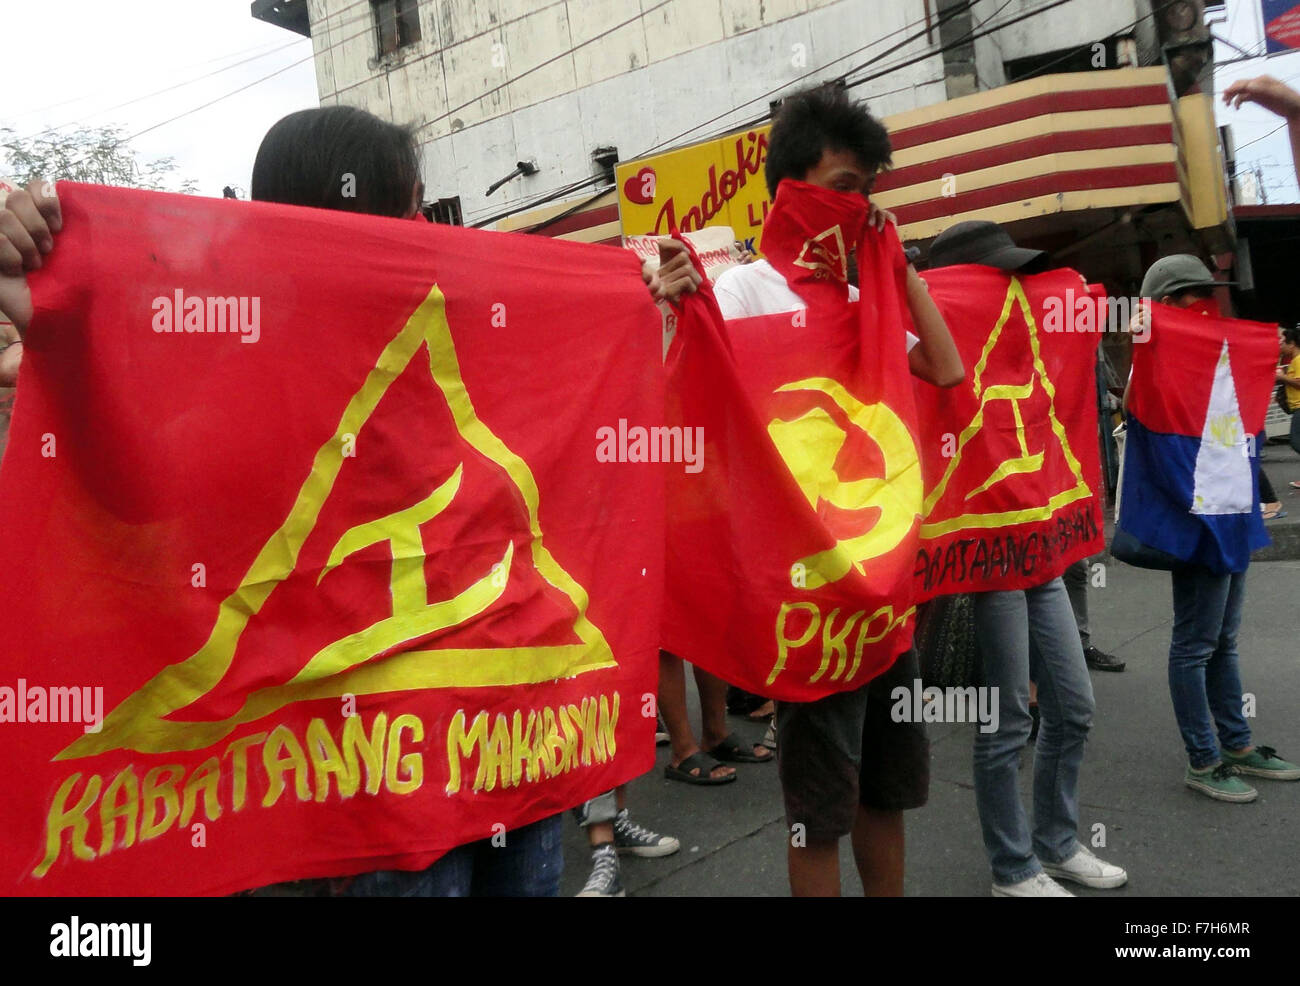 Filipino activists from the communist youth group Kabataang Makabayan (Patriotic Youth) hold flags and placards as they shout slogans during a 'lightning rally' in Caloocan City. The group held the 'lightning rally' to protest the intervention of the United States in the Philippines. The communist youth group is a member-organization of the outlawed National Democratic Front of the Philippines (NDFP), which is waging an armed rebellion against the Philippine government along with the Communist Party of the Philippines (CPP-MLM) and the New People's Army (NPA). (Photo by Richard James Mendoza / Stock Photo